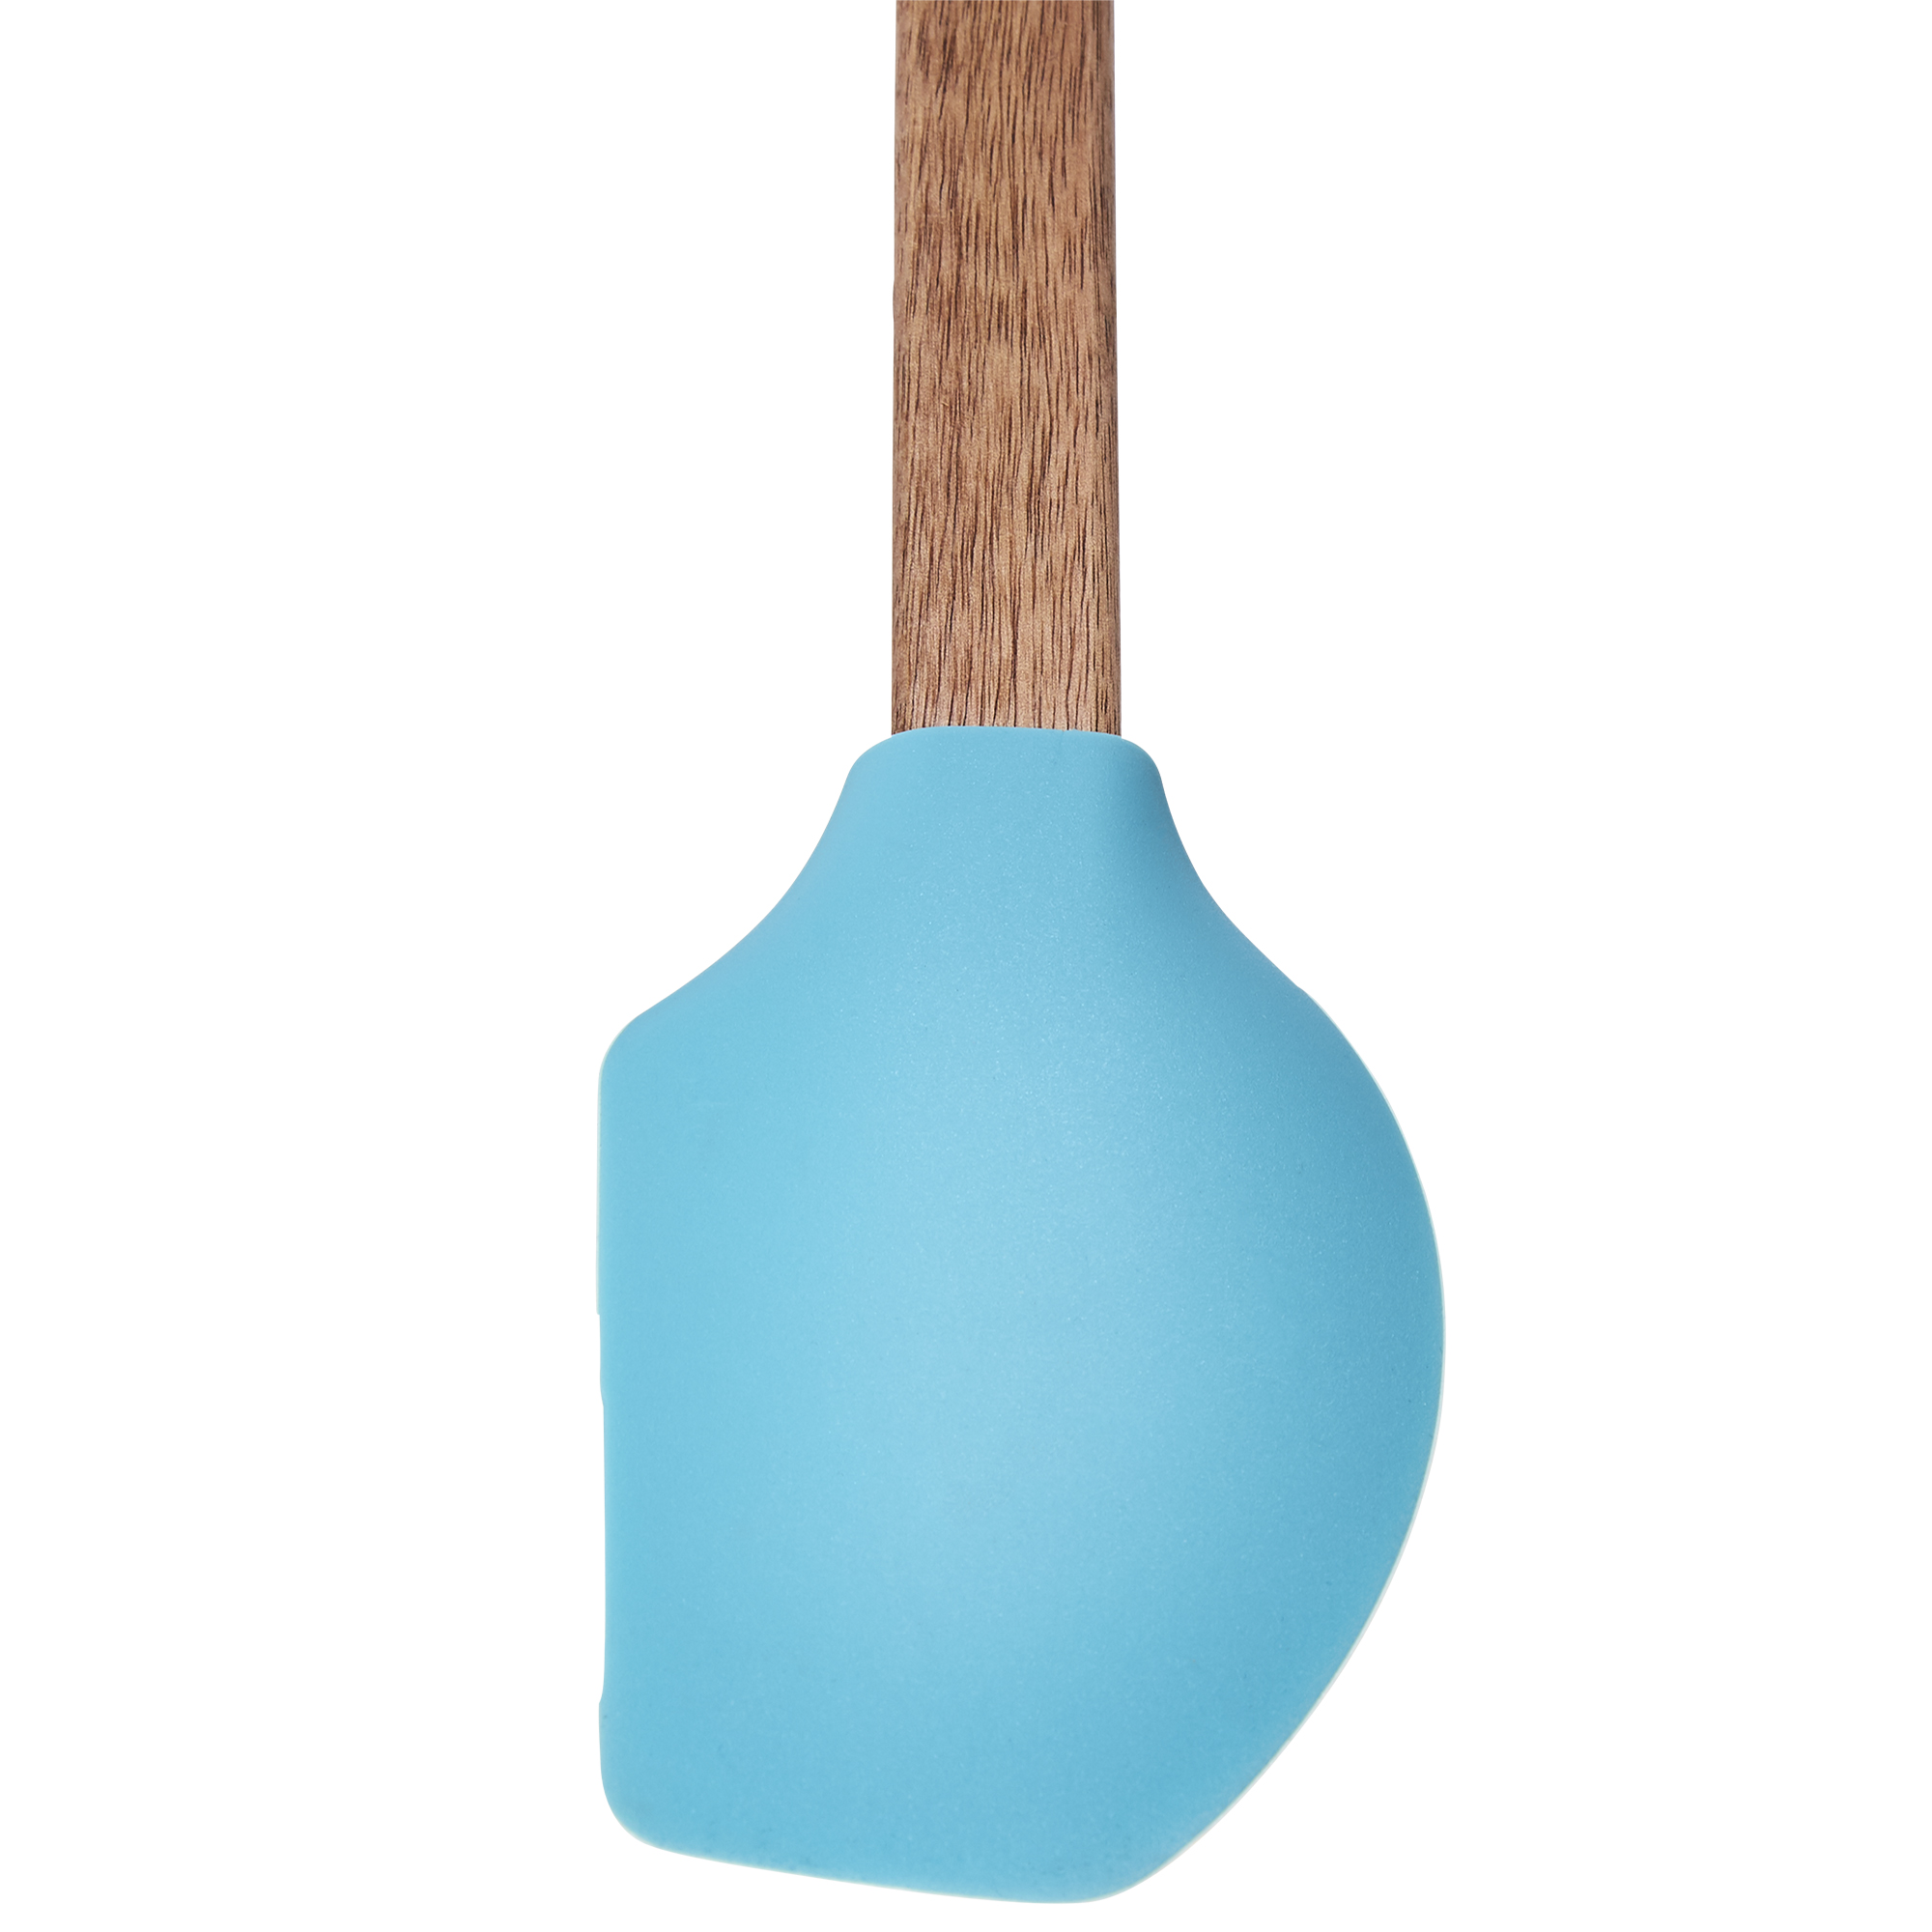 The Pioneer Woman 4-Piece Silicone Spatula Set with Acacia Wood Handles, Assorted Colors - image 5 of 12